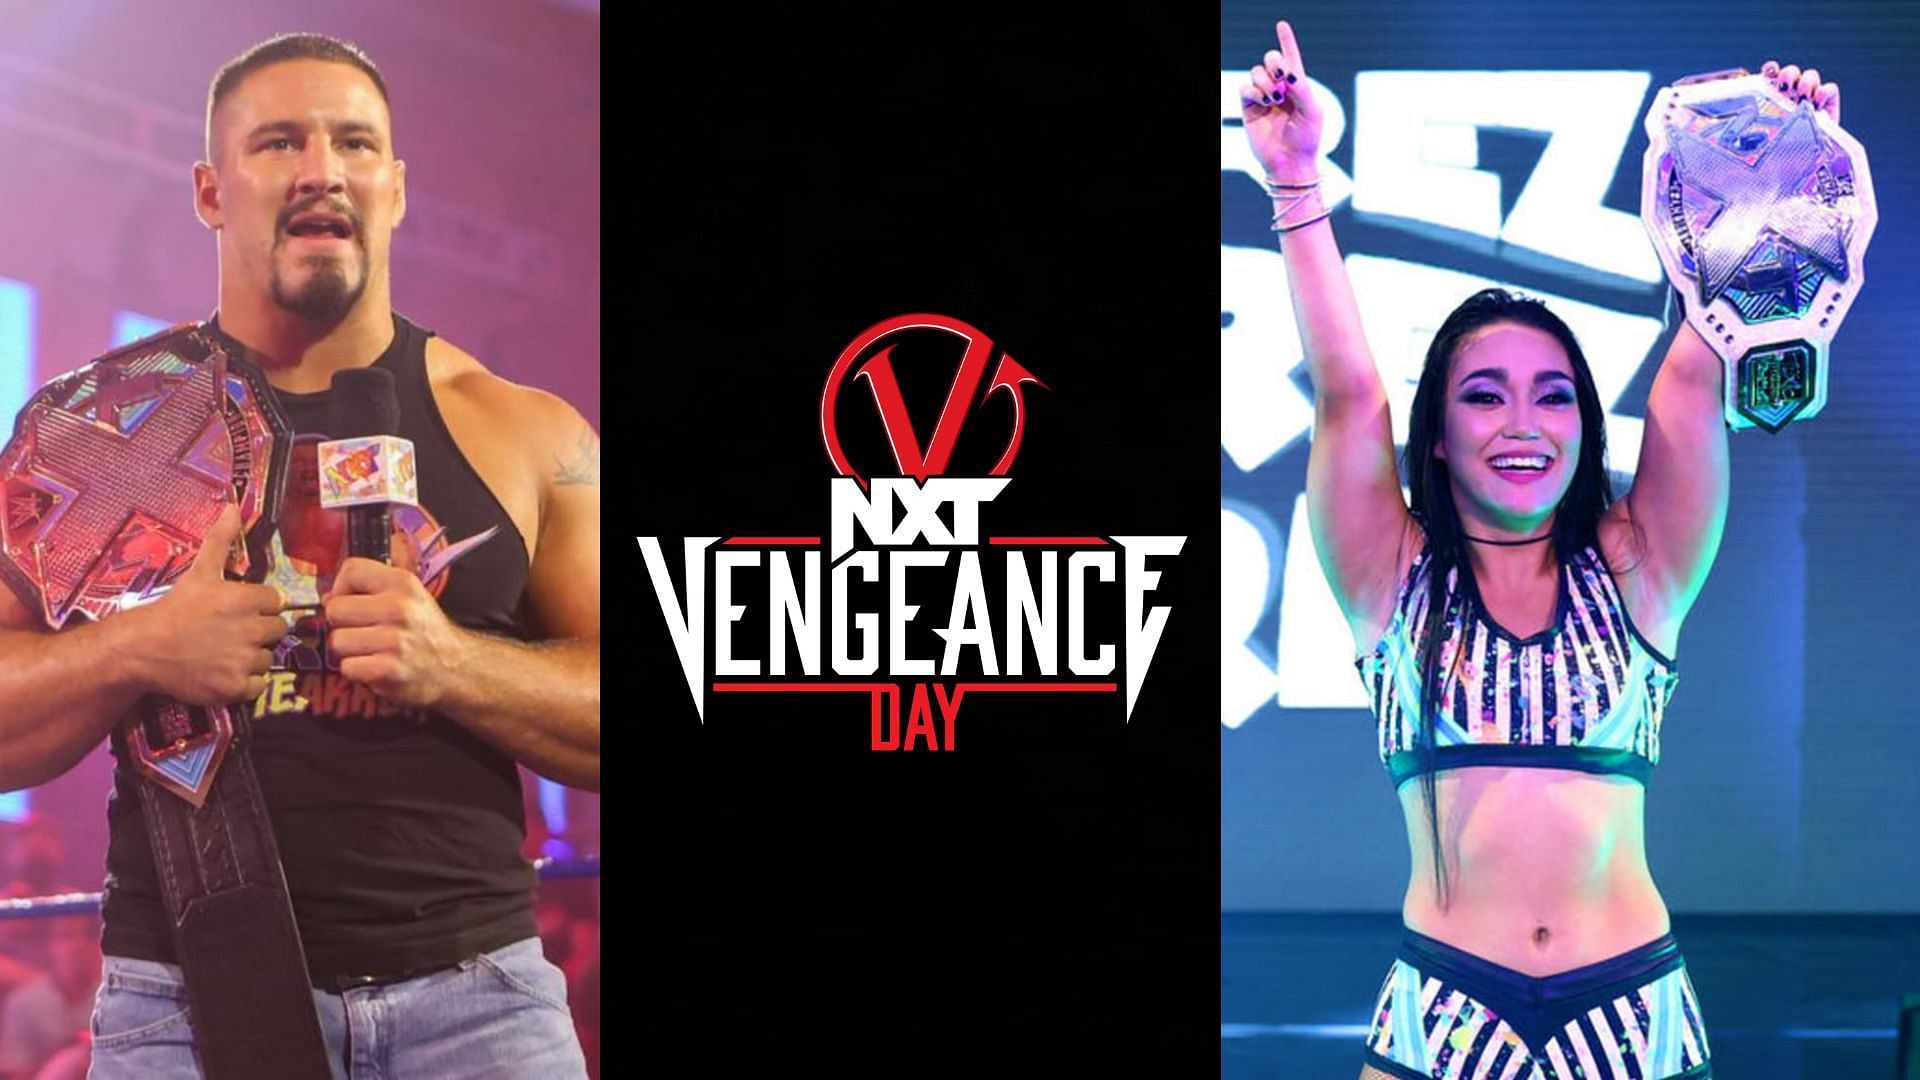 NXT Vengeance Day 2023 matches will mostly see gold on the line